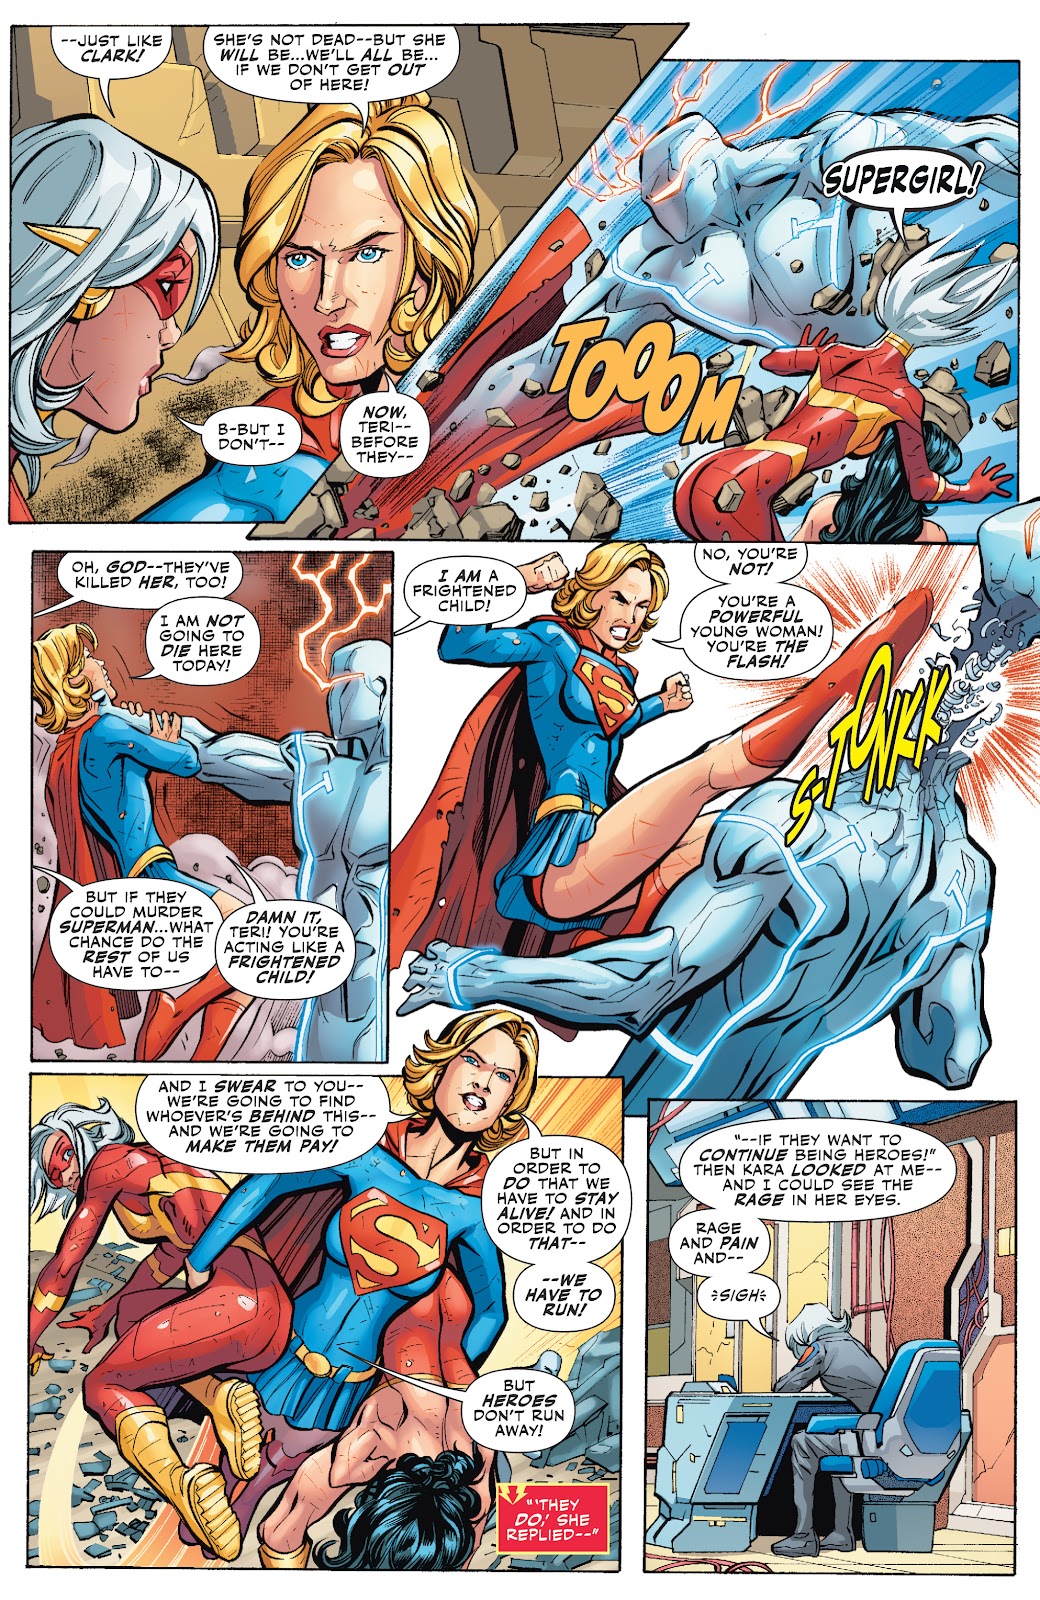 Justice League 3001 issue 7 - Page 4